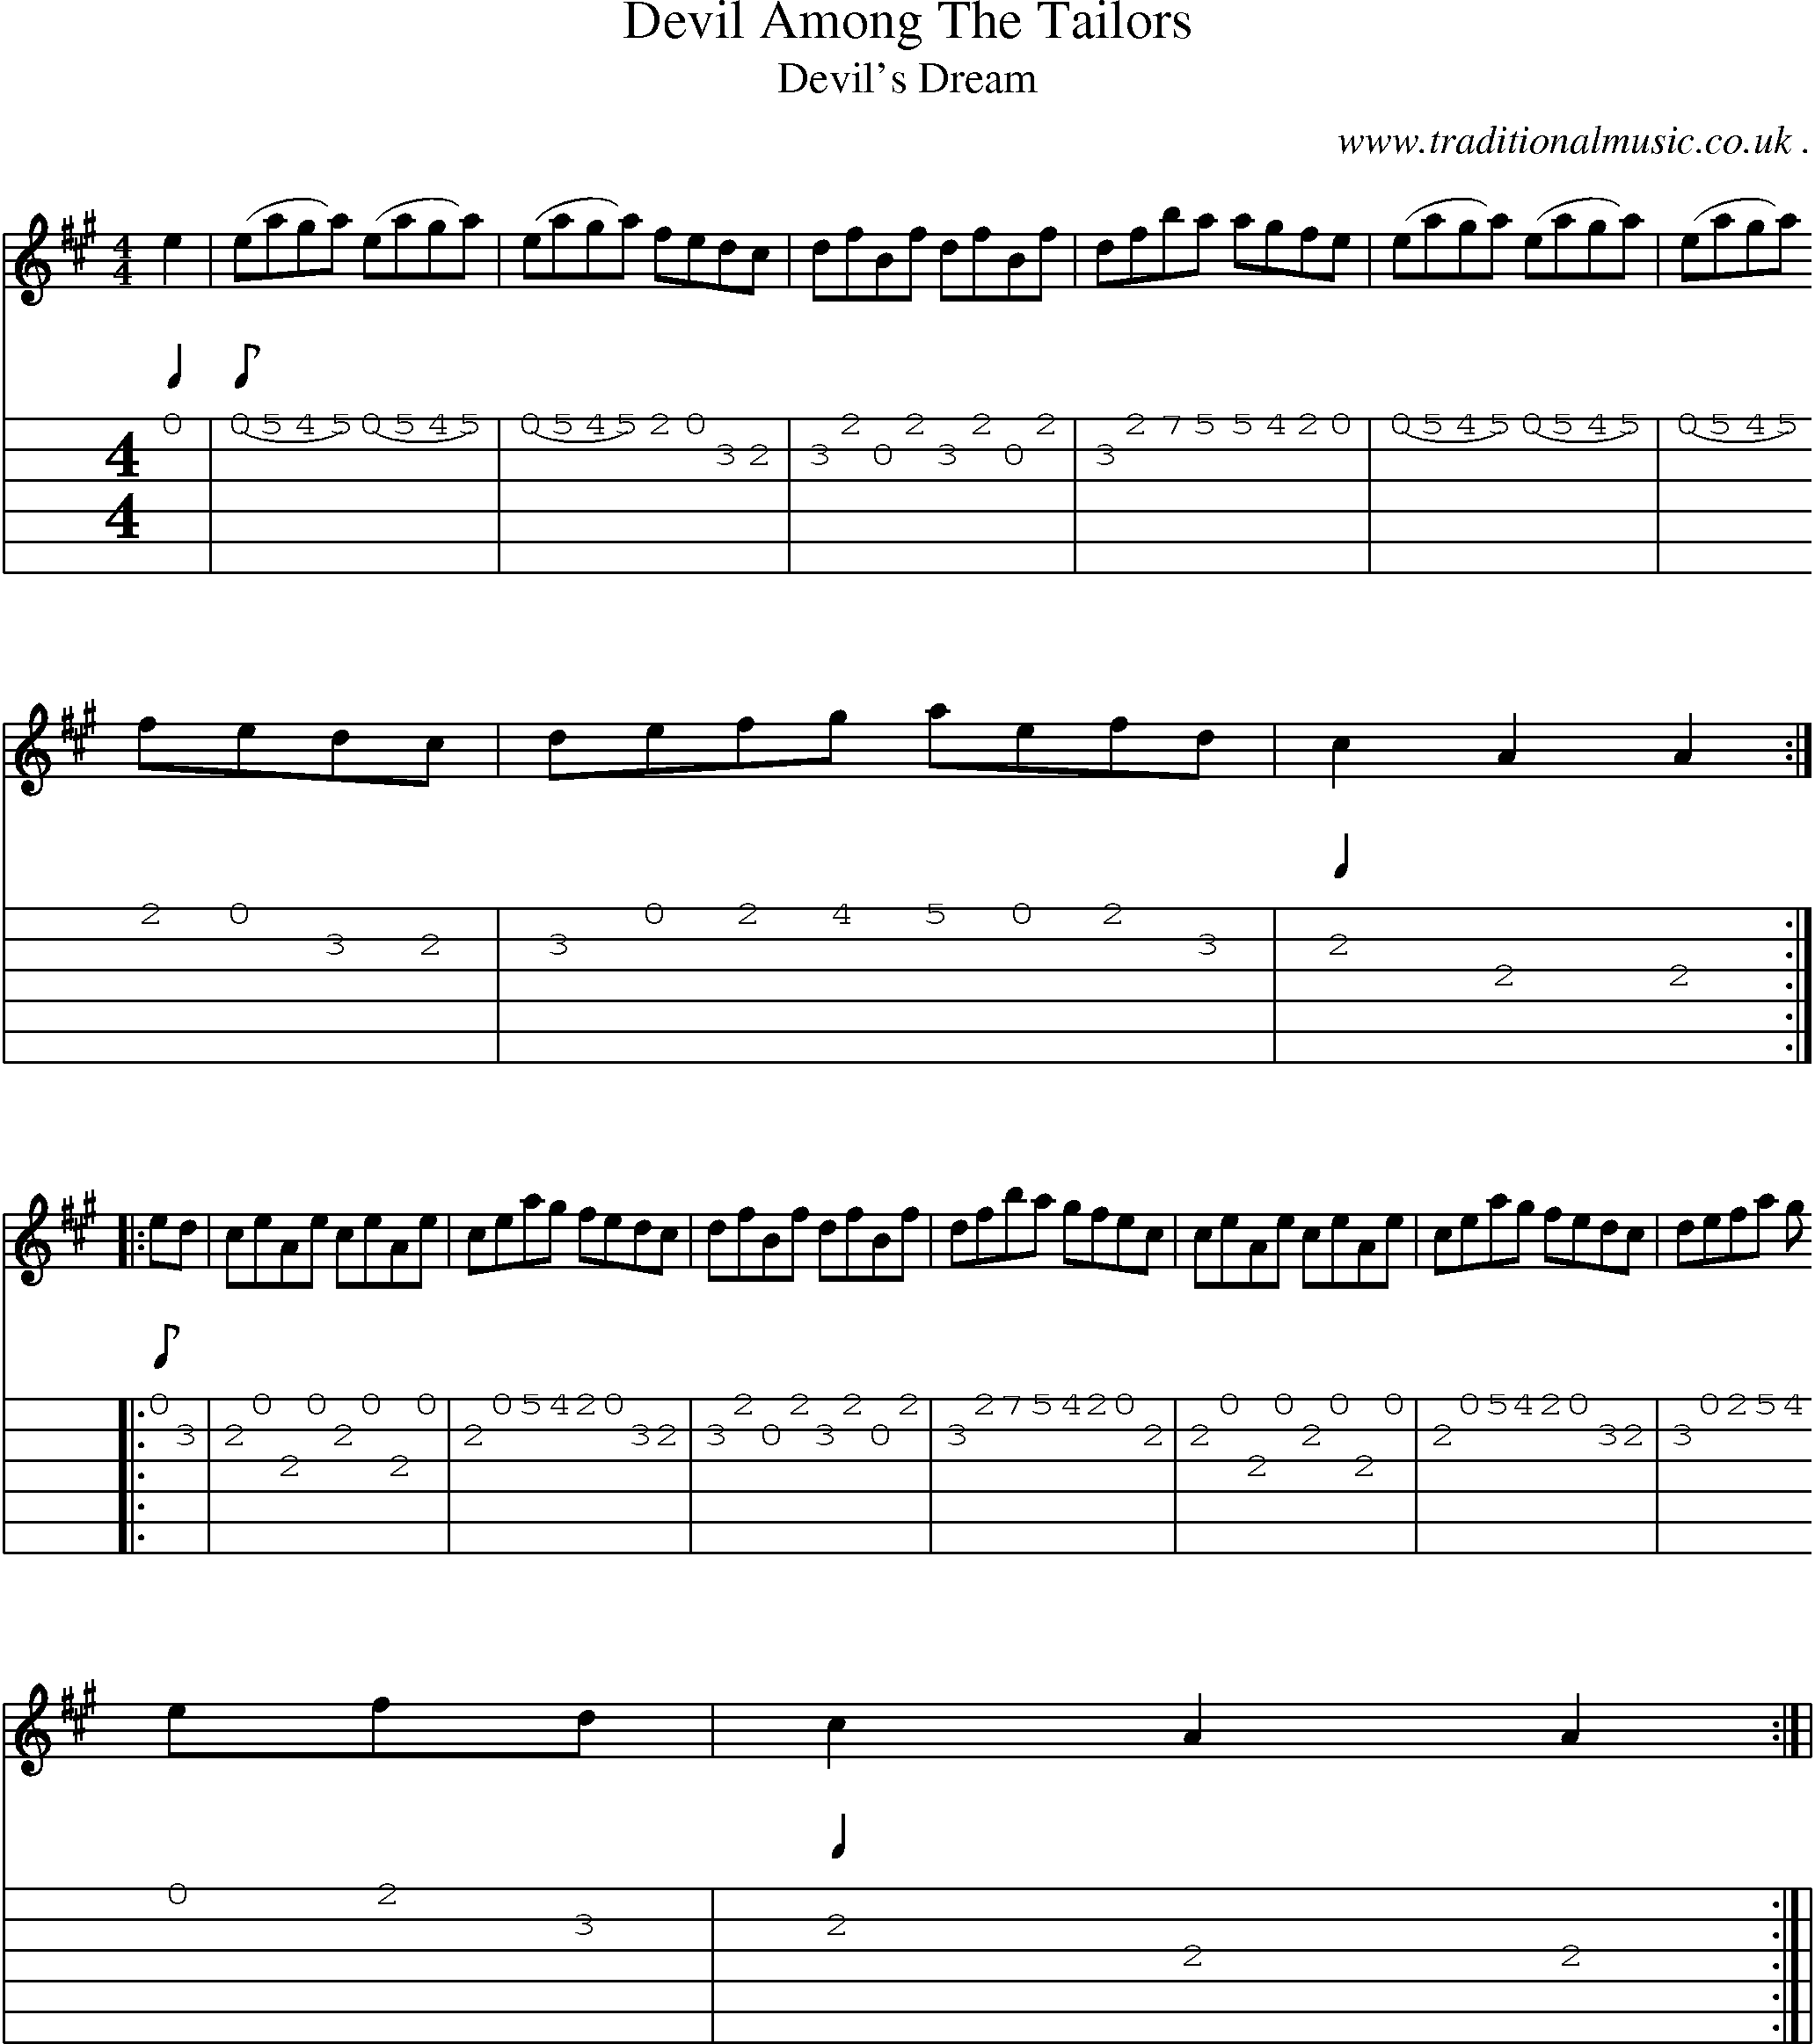 Sheet-Music and Guitar Tabs for Devil Among The Tailors 